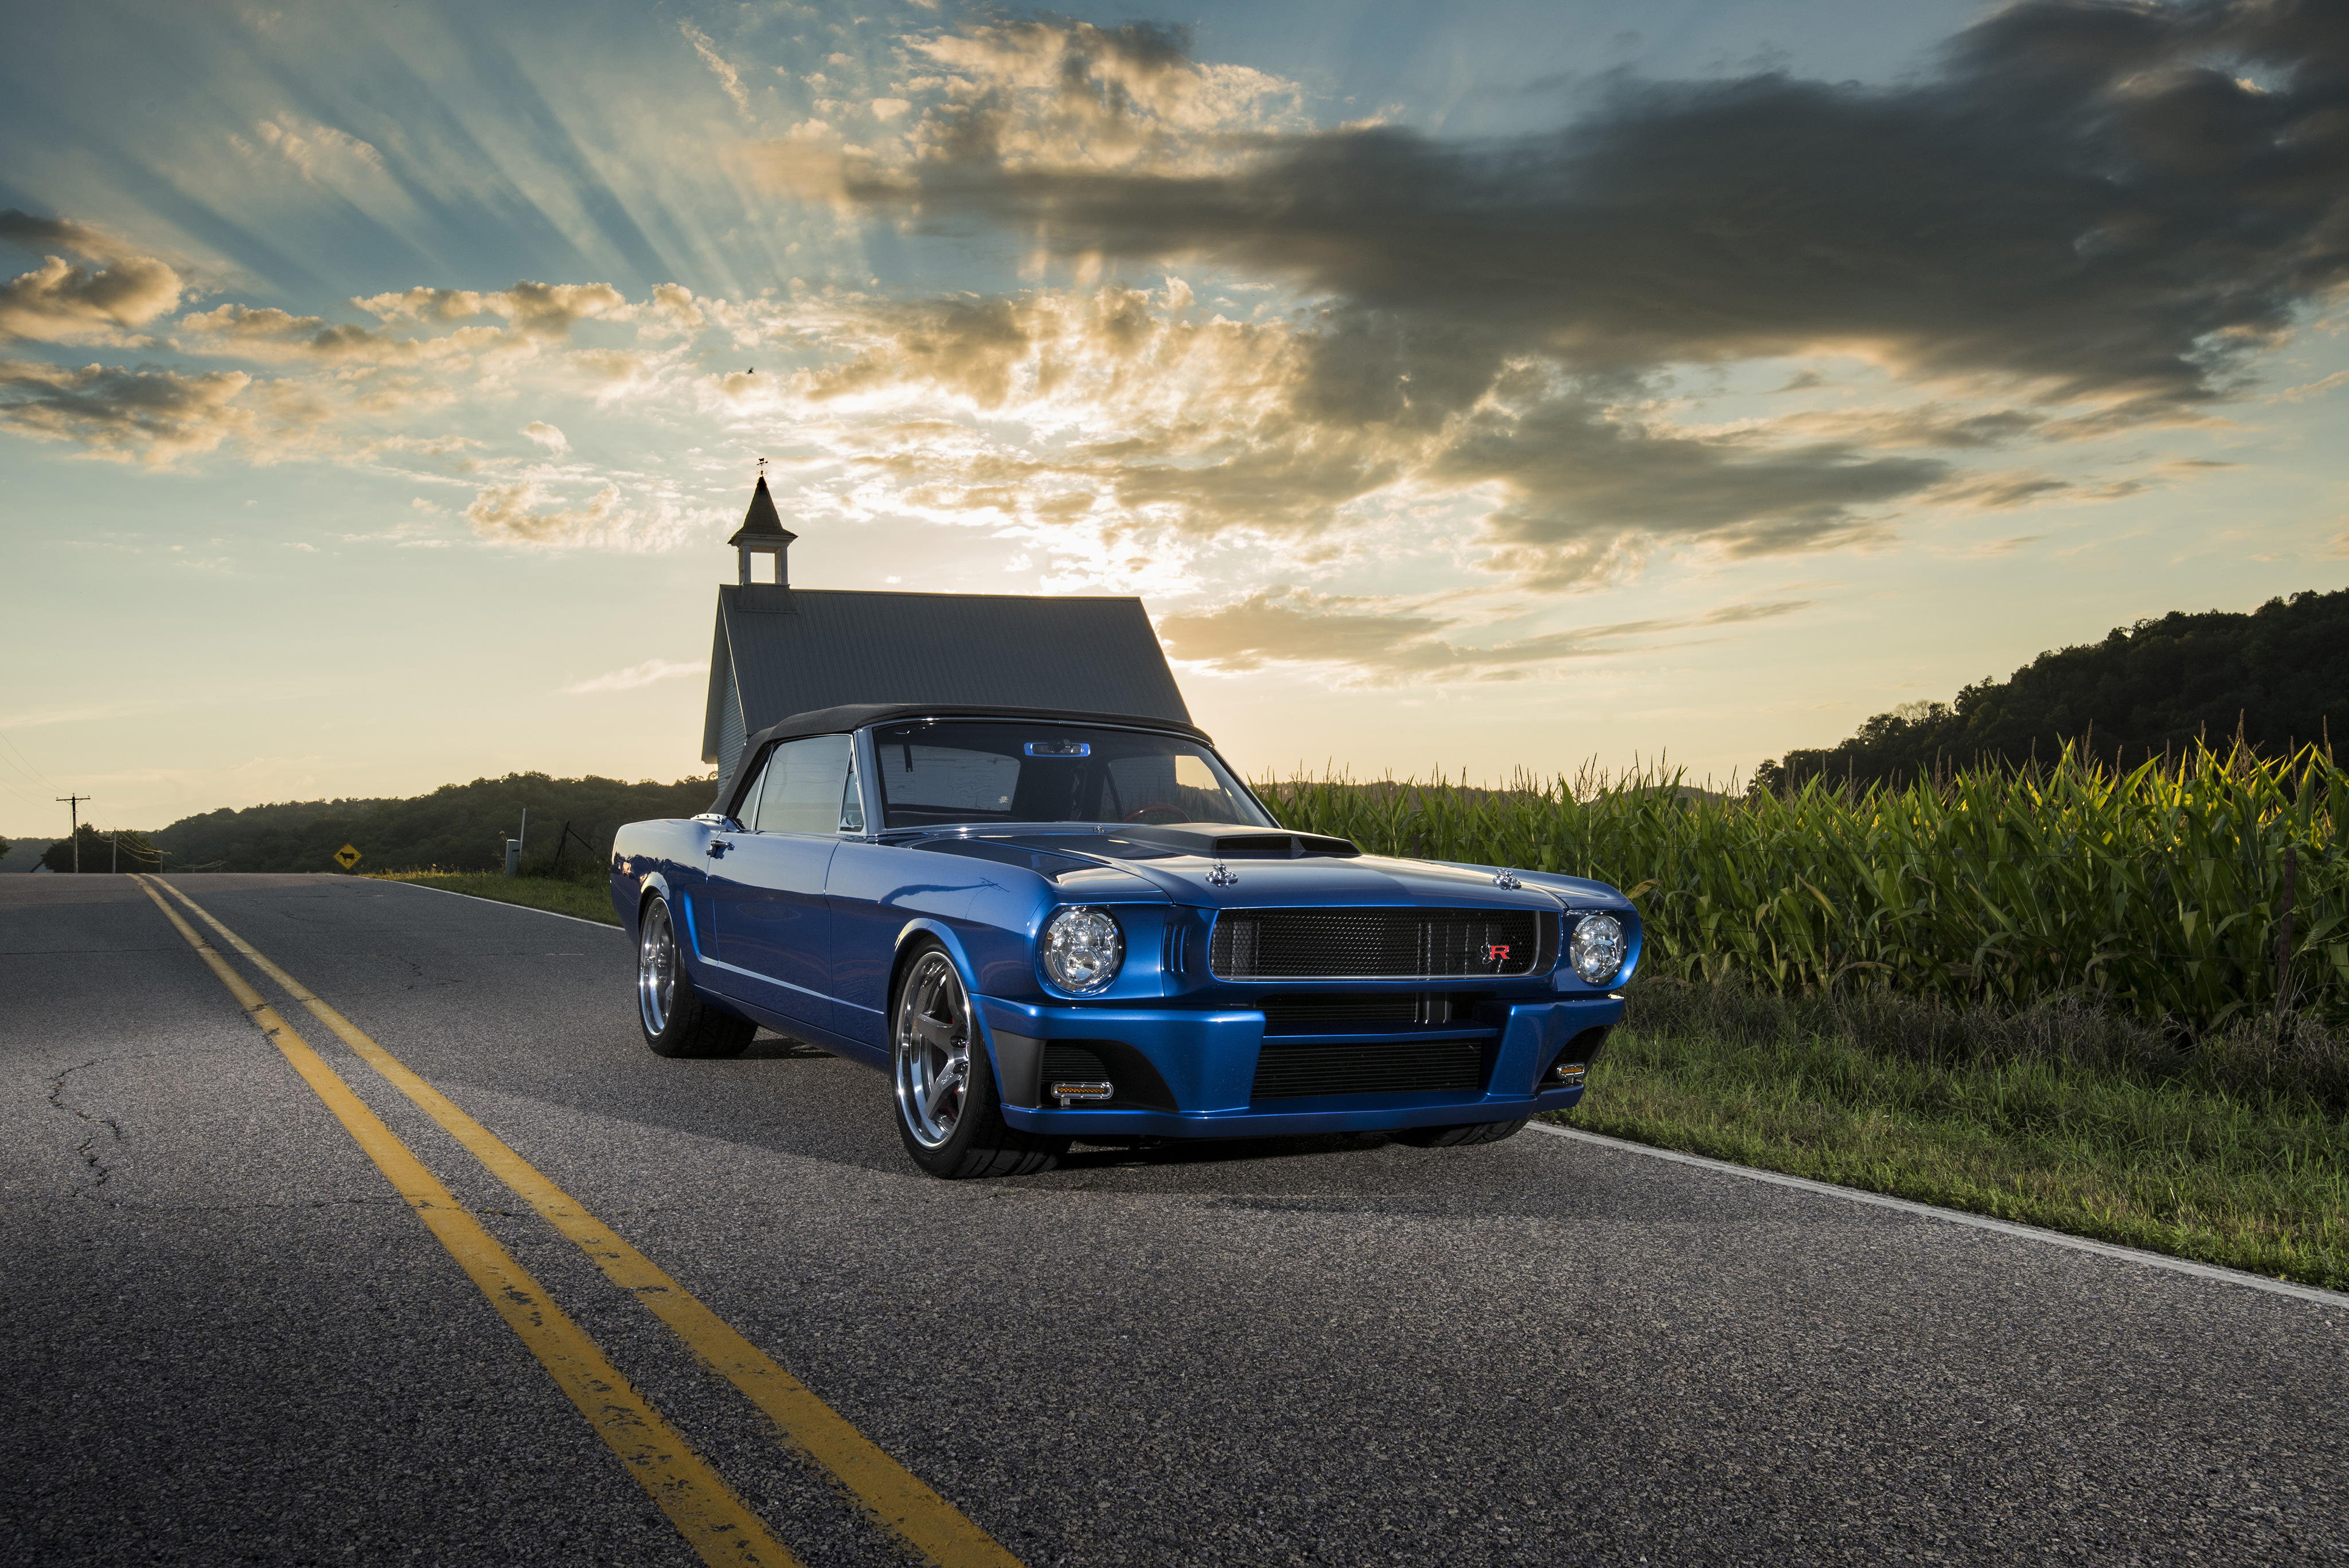 Wallpapers Ford Mustang Mustang blue car on the desktop